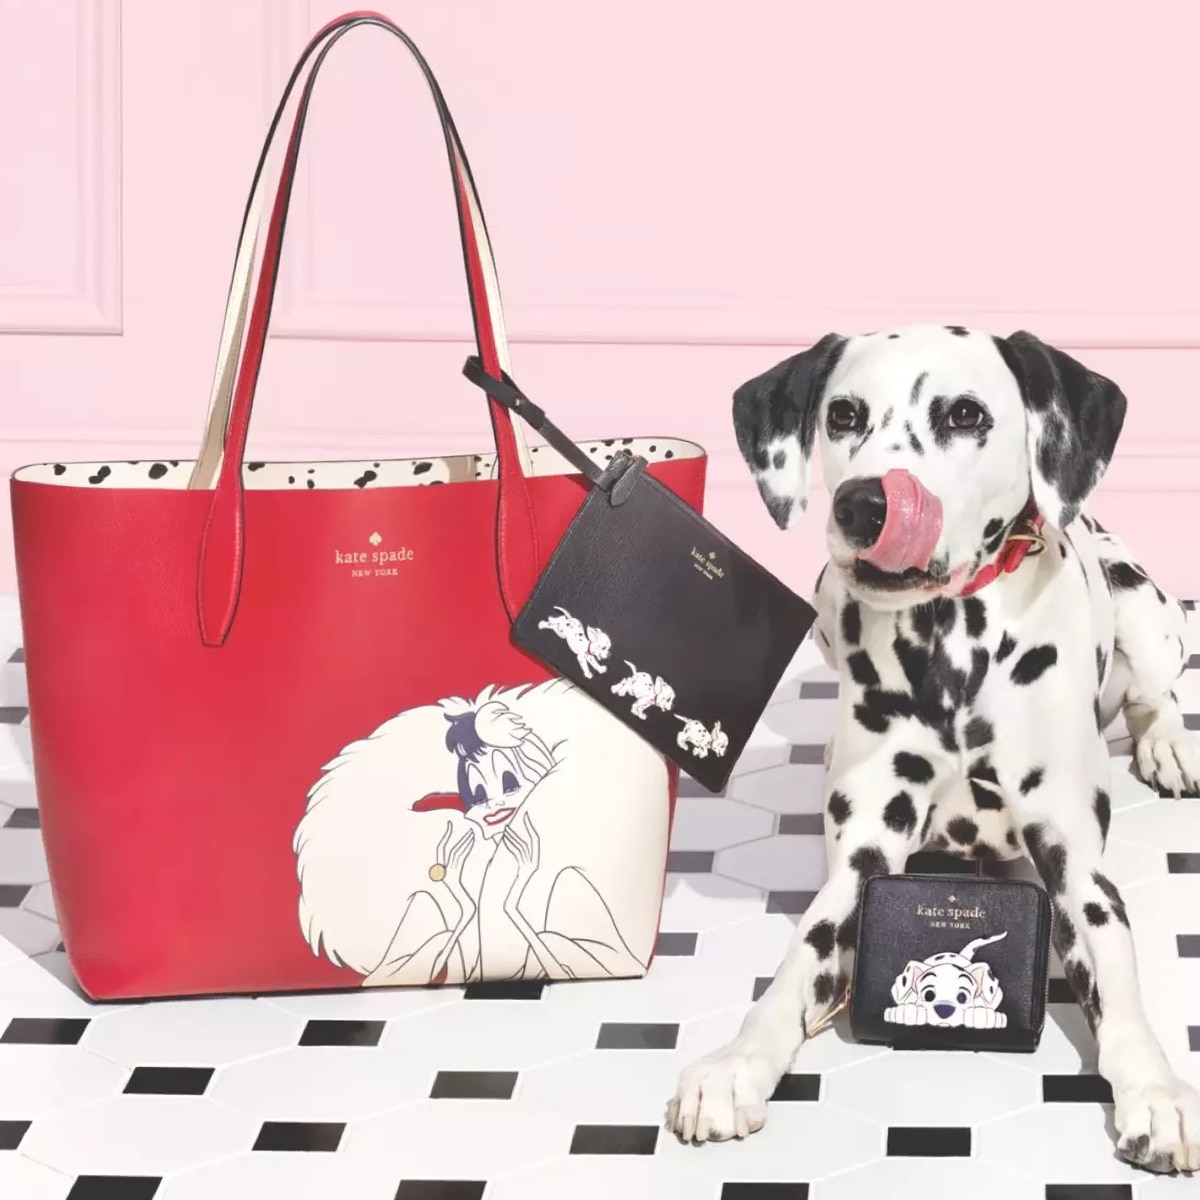 NEW Minnie Mouse Kate Spade Collection Available at Walt Disney World - WDW  News Today